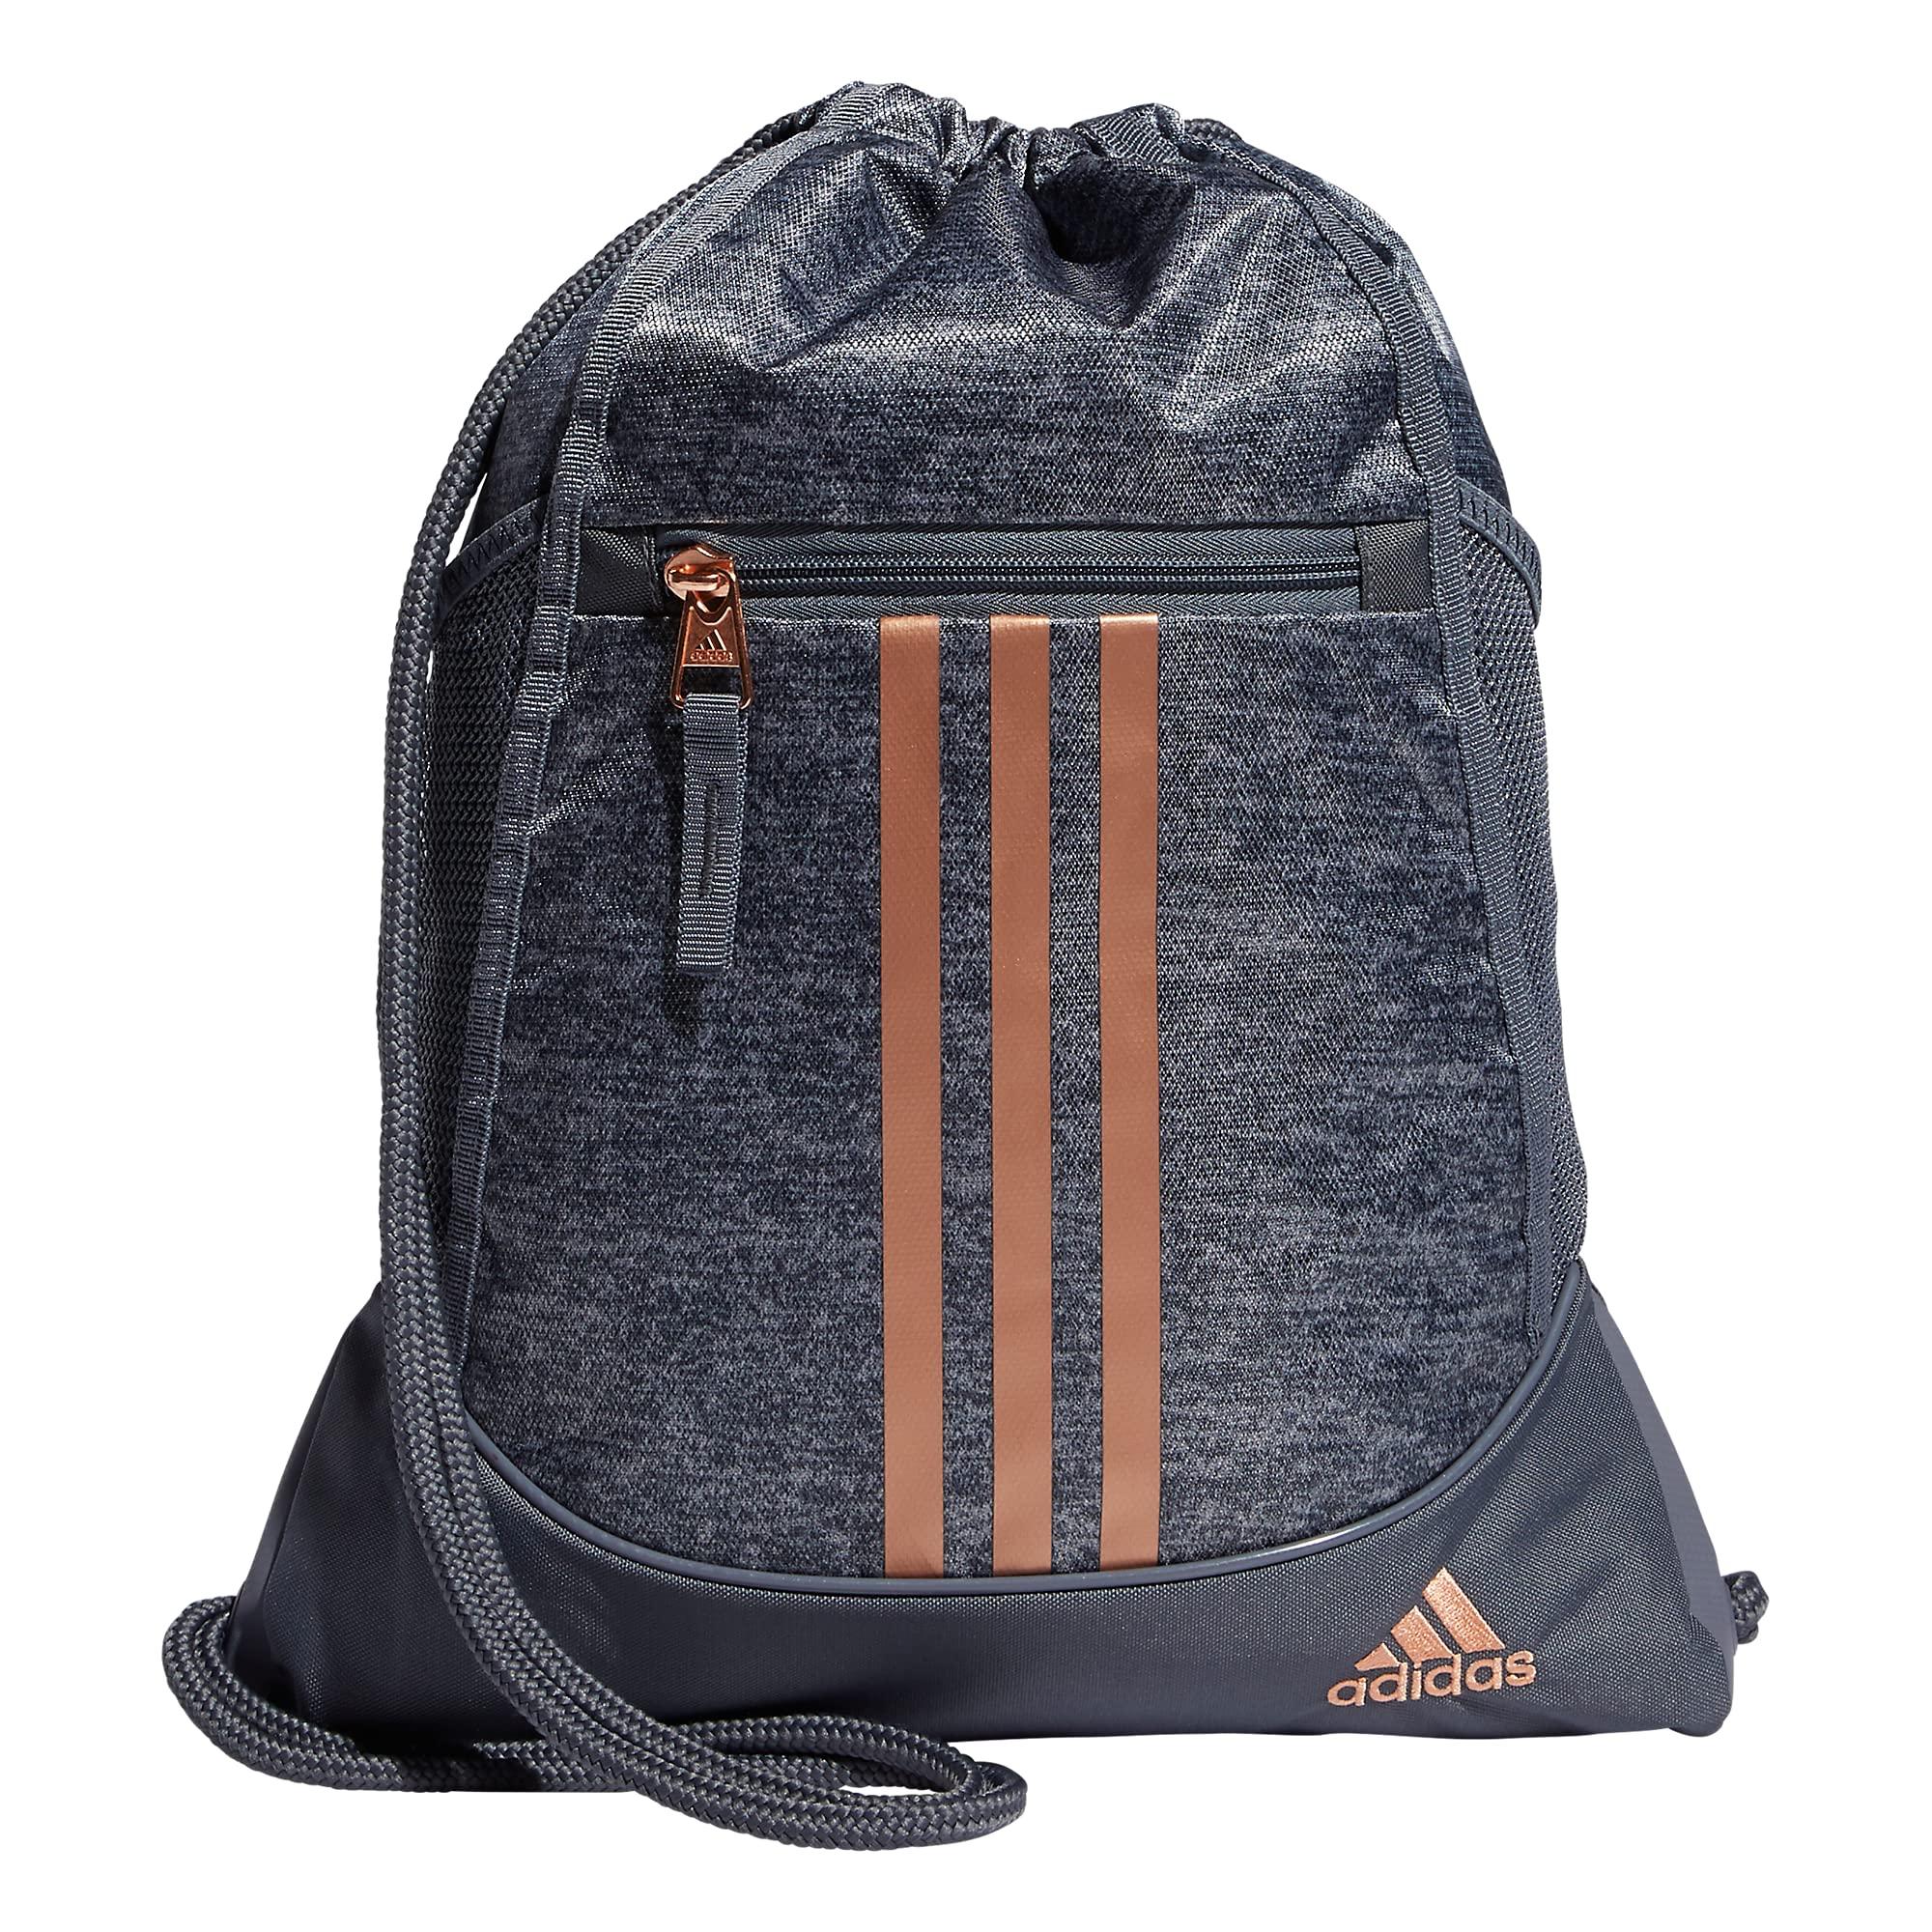 adidas Alliance Sackpack in Blue | Lyst